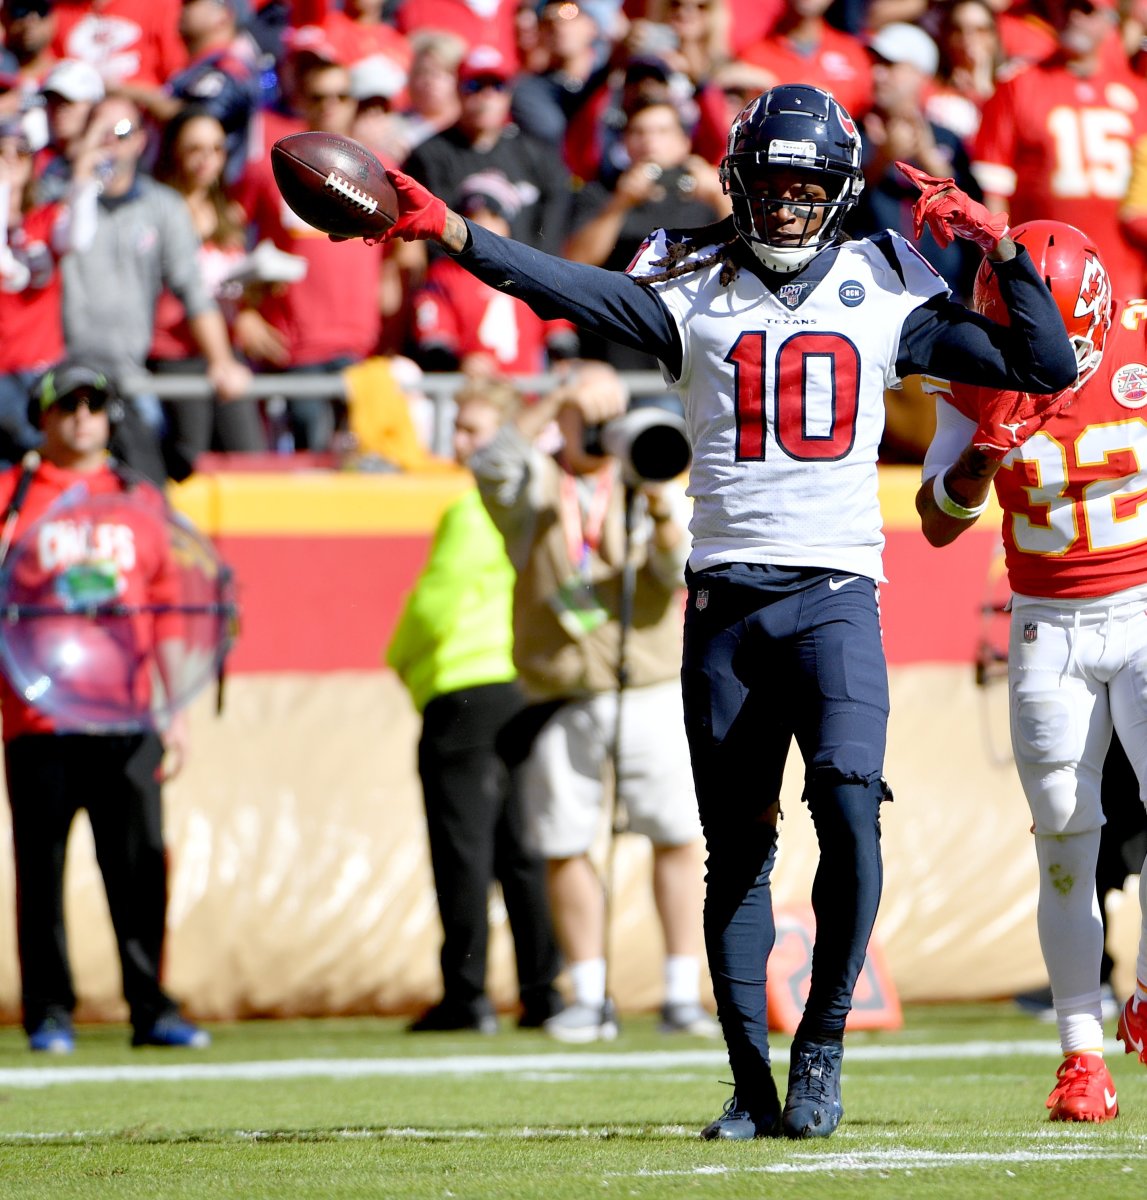 Texans receiver DeAndre Hopkins celebrates after gaining a first down against the Chiefs during the 2019 season.